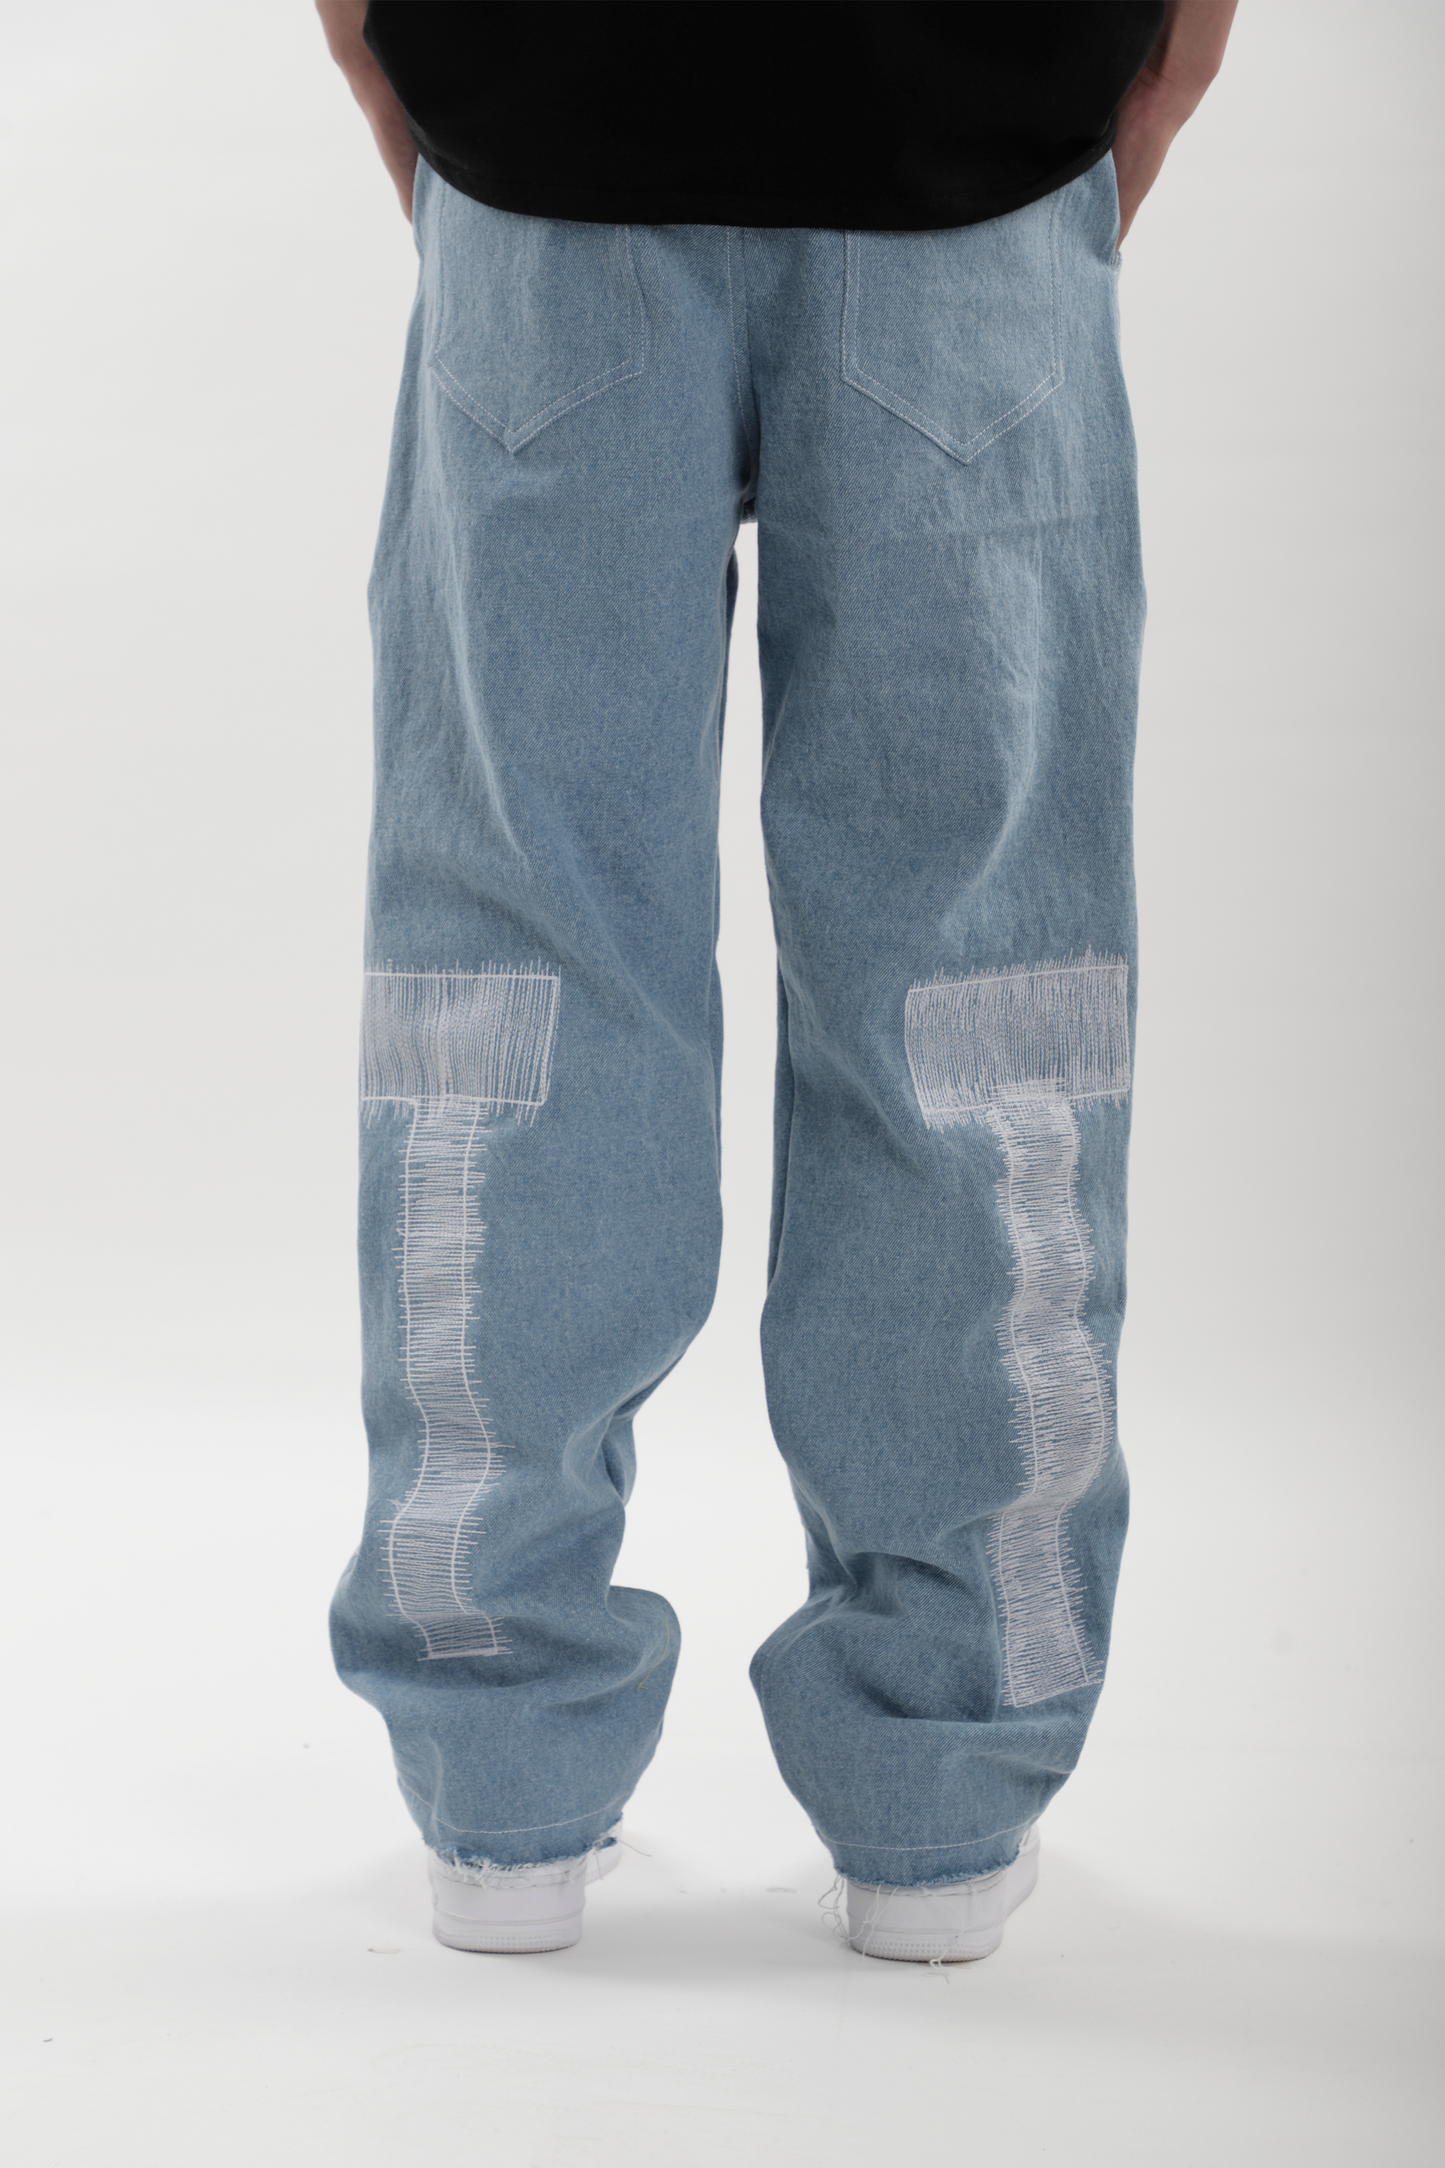 Rugged Jeans